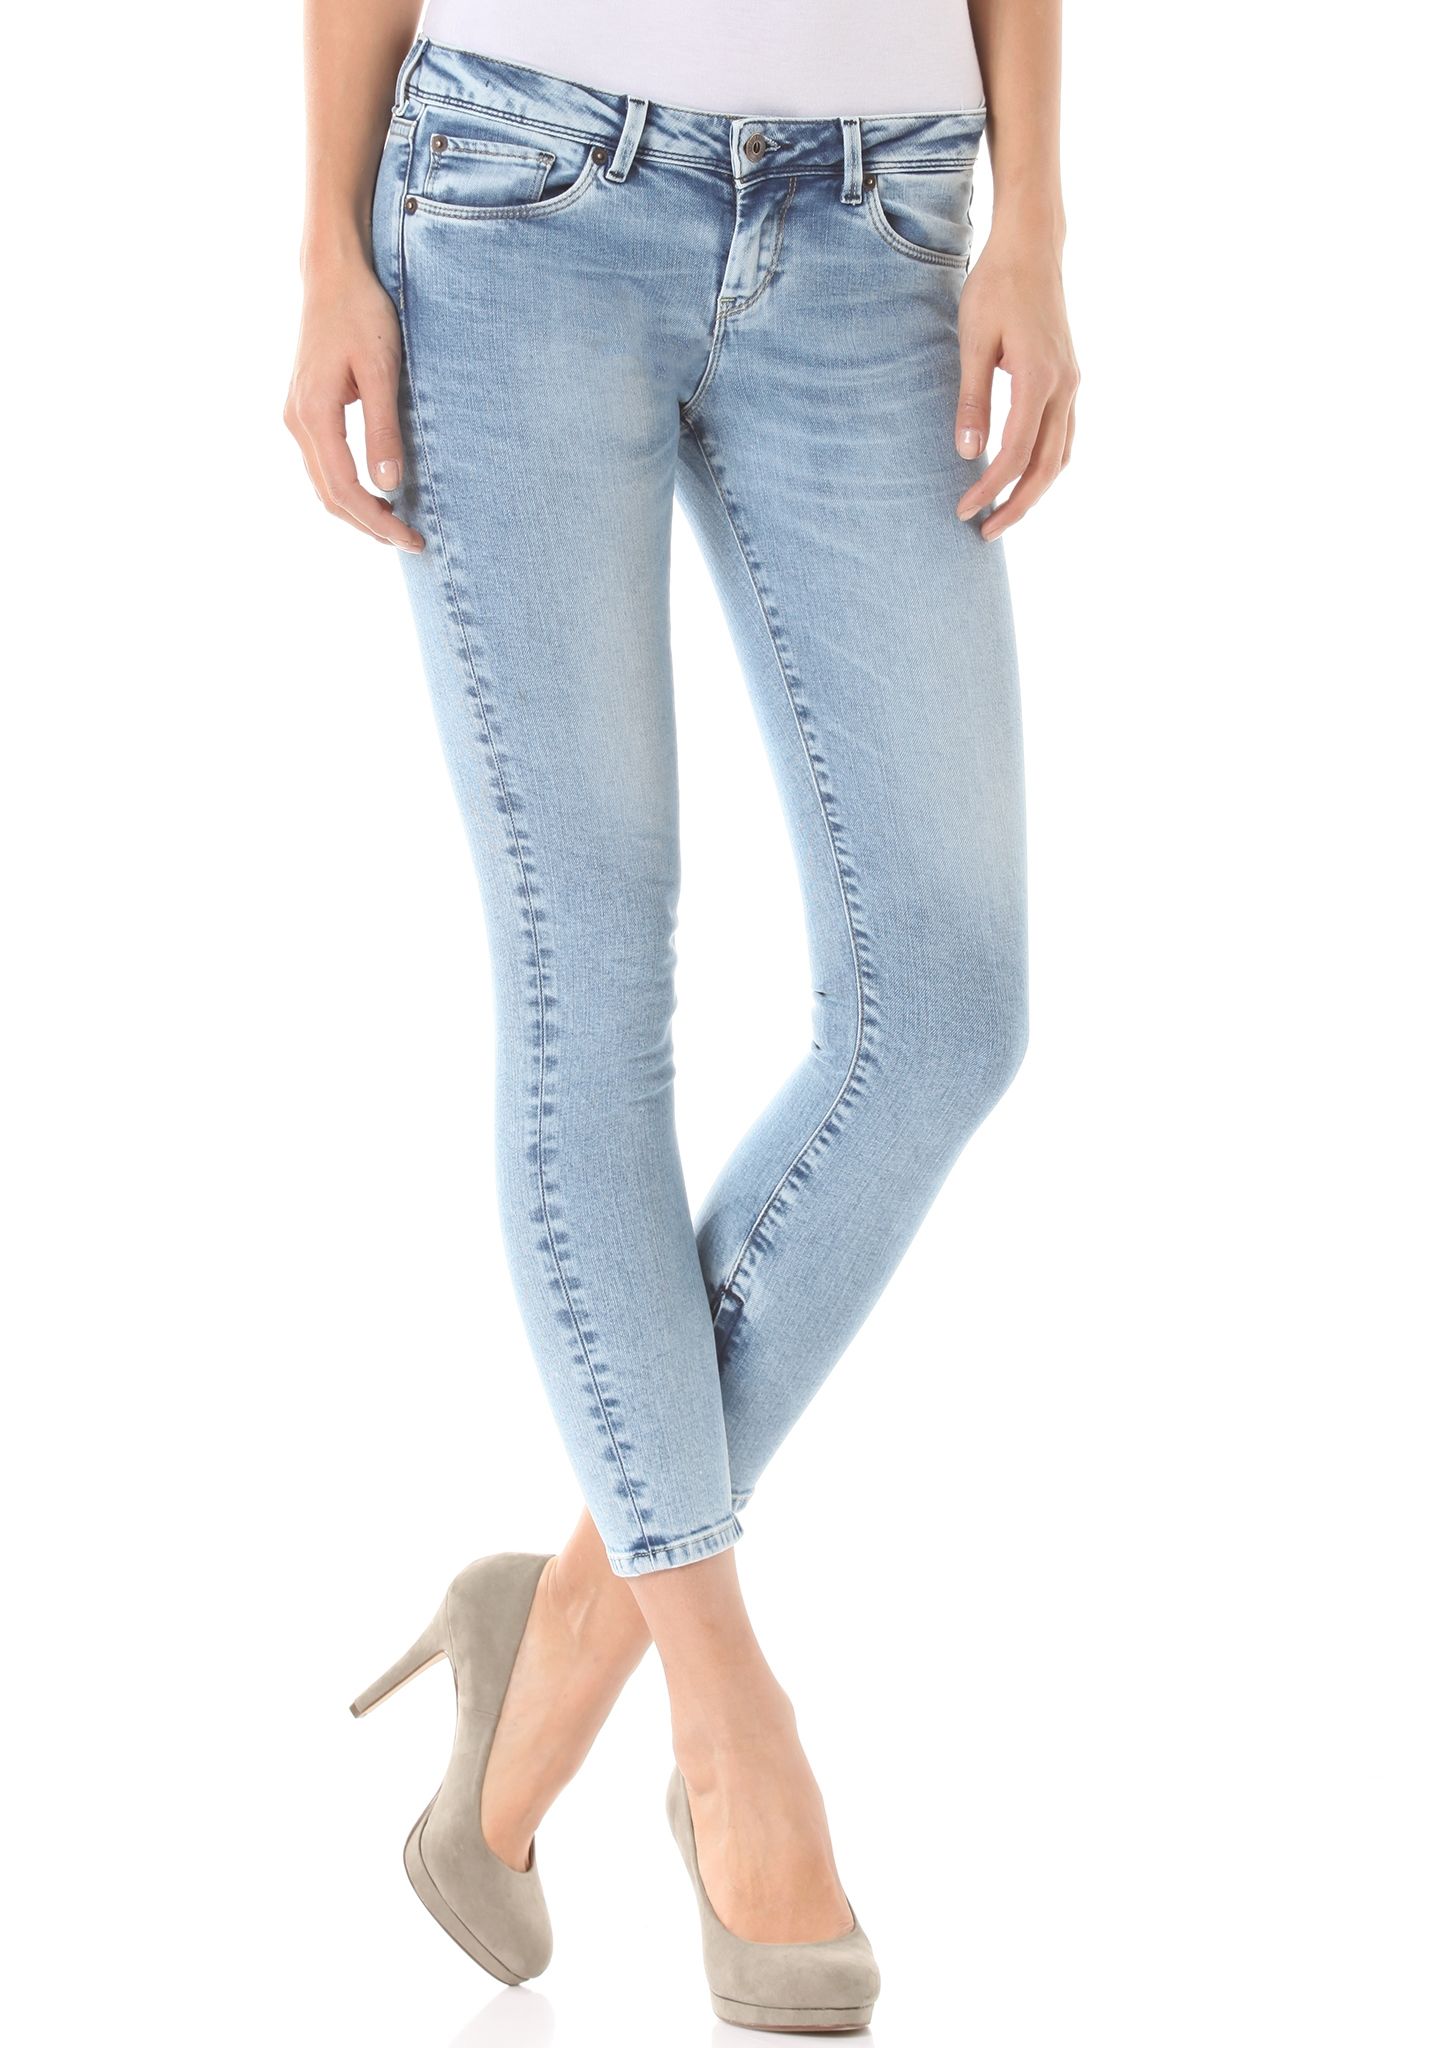 PEPE JEANS FOR WOMEN pepe jeans cher - denim jeans for women - blue - planet sports KITGXYU